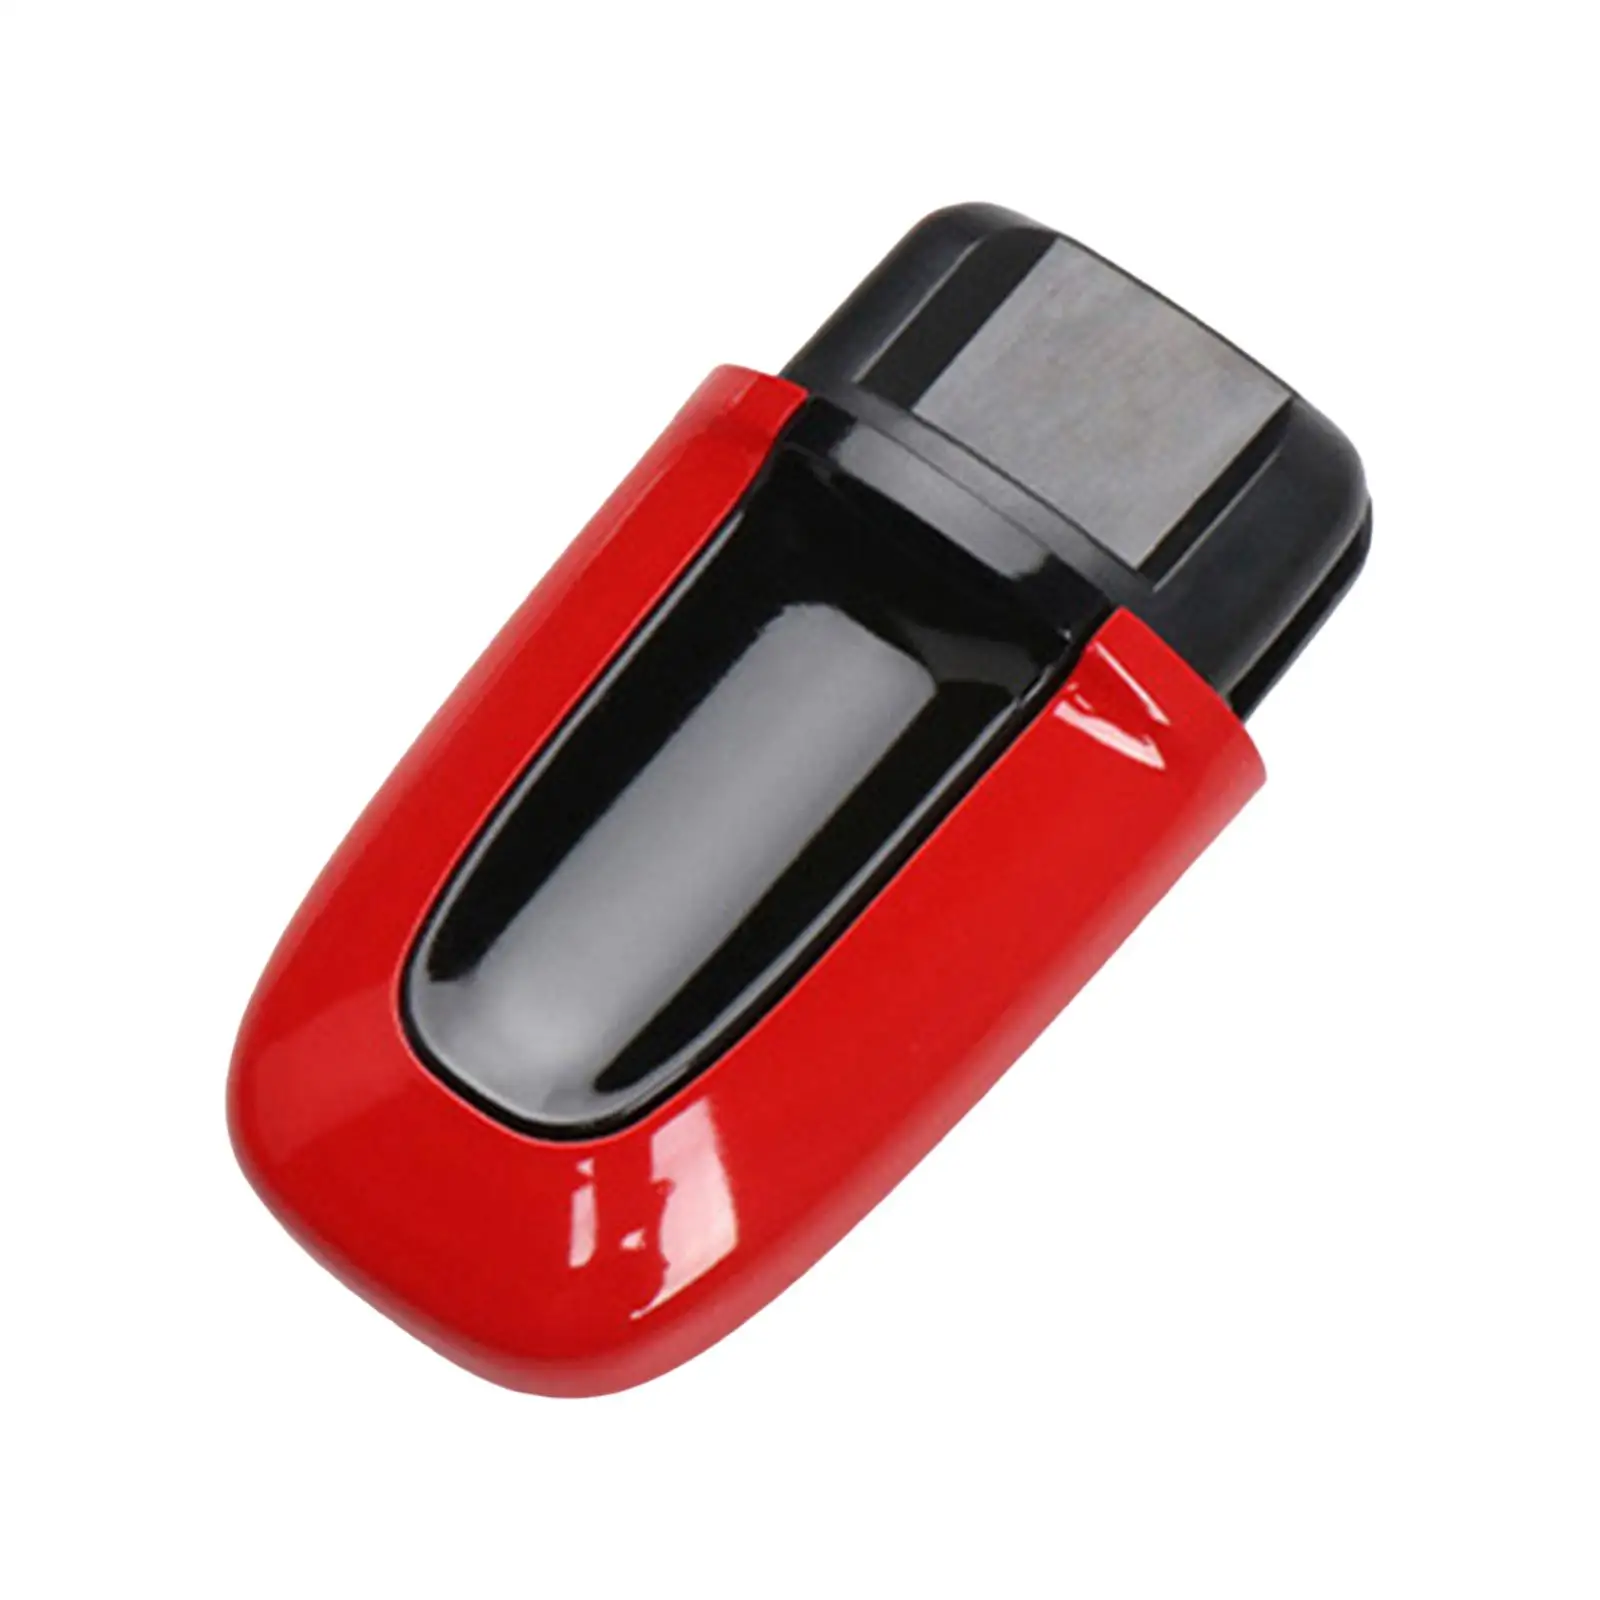 Entry and Drive Dummy Key Plug, 7PP919157A, Spare Parts, High Performance, Premium Durable Car Accessories Replaces